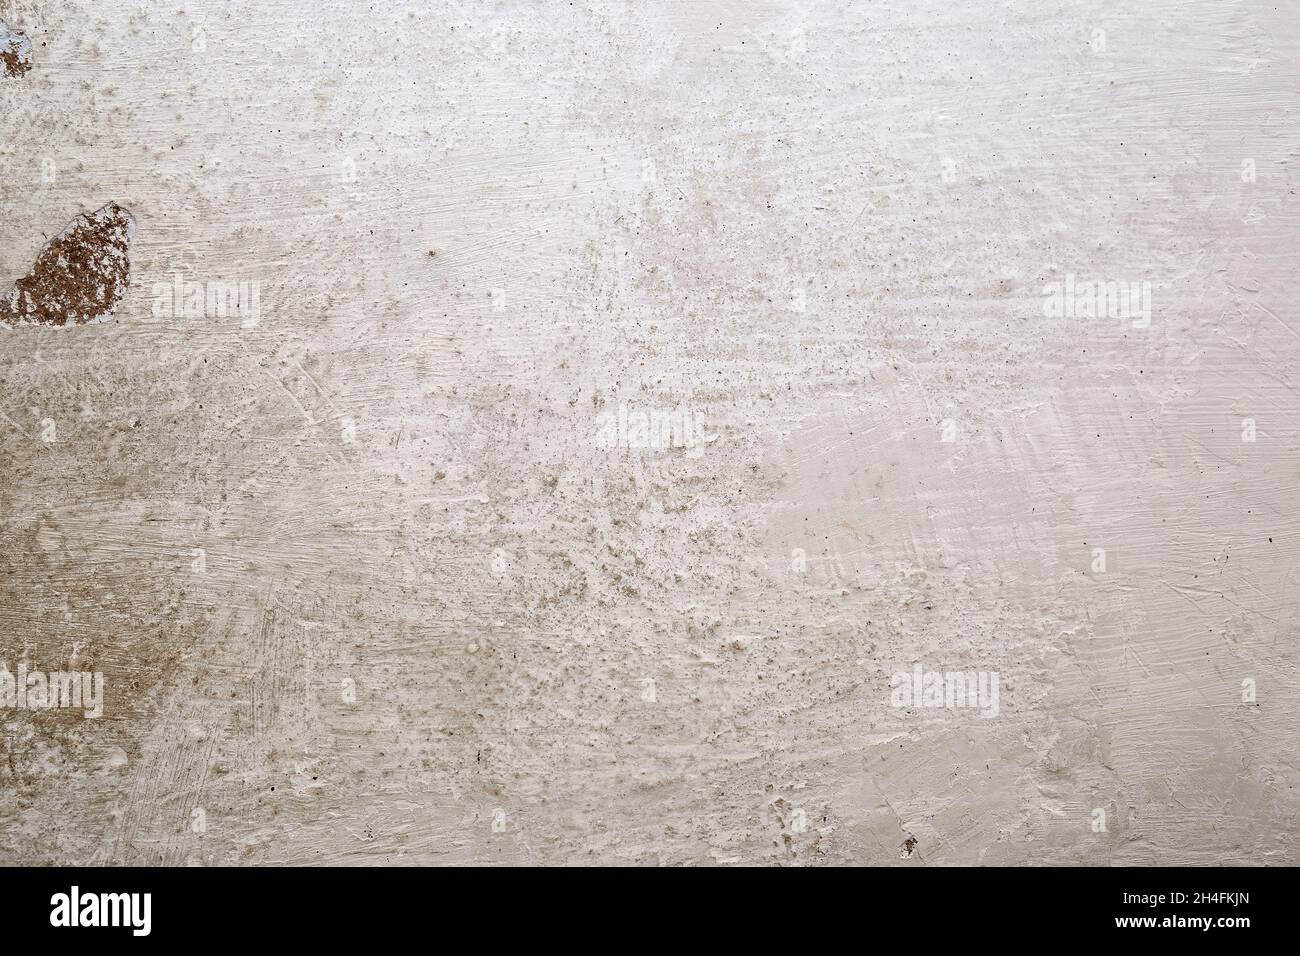 Texture of the whitewashed wall with scuffs, scratches and dirty spots Stock Photo